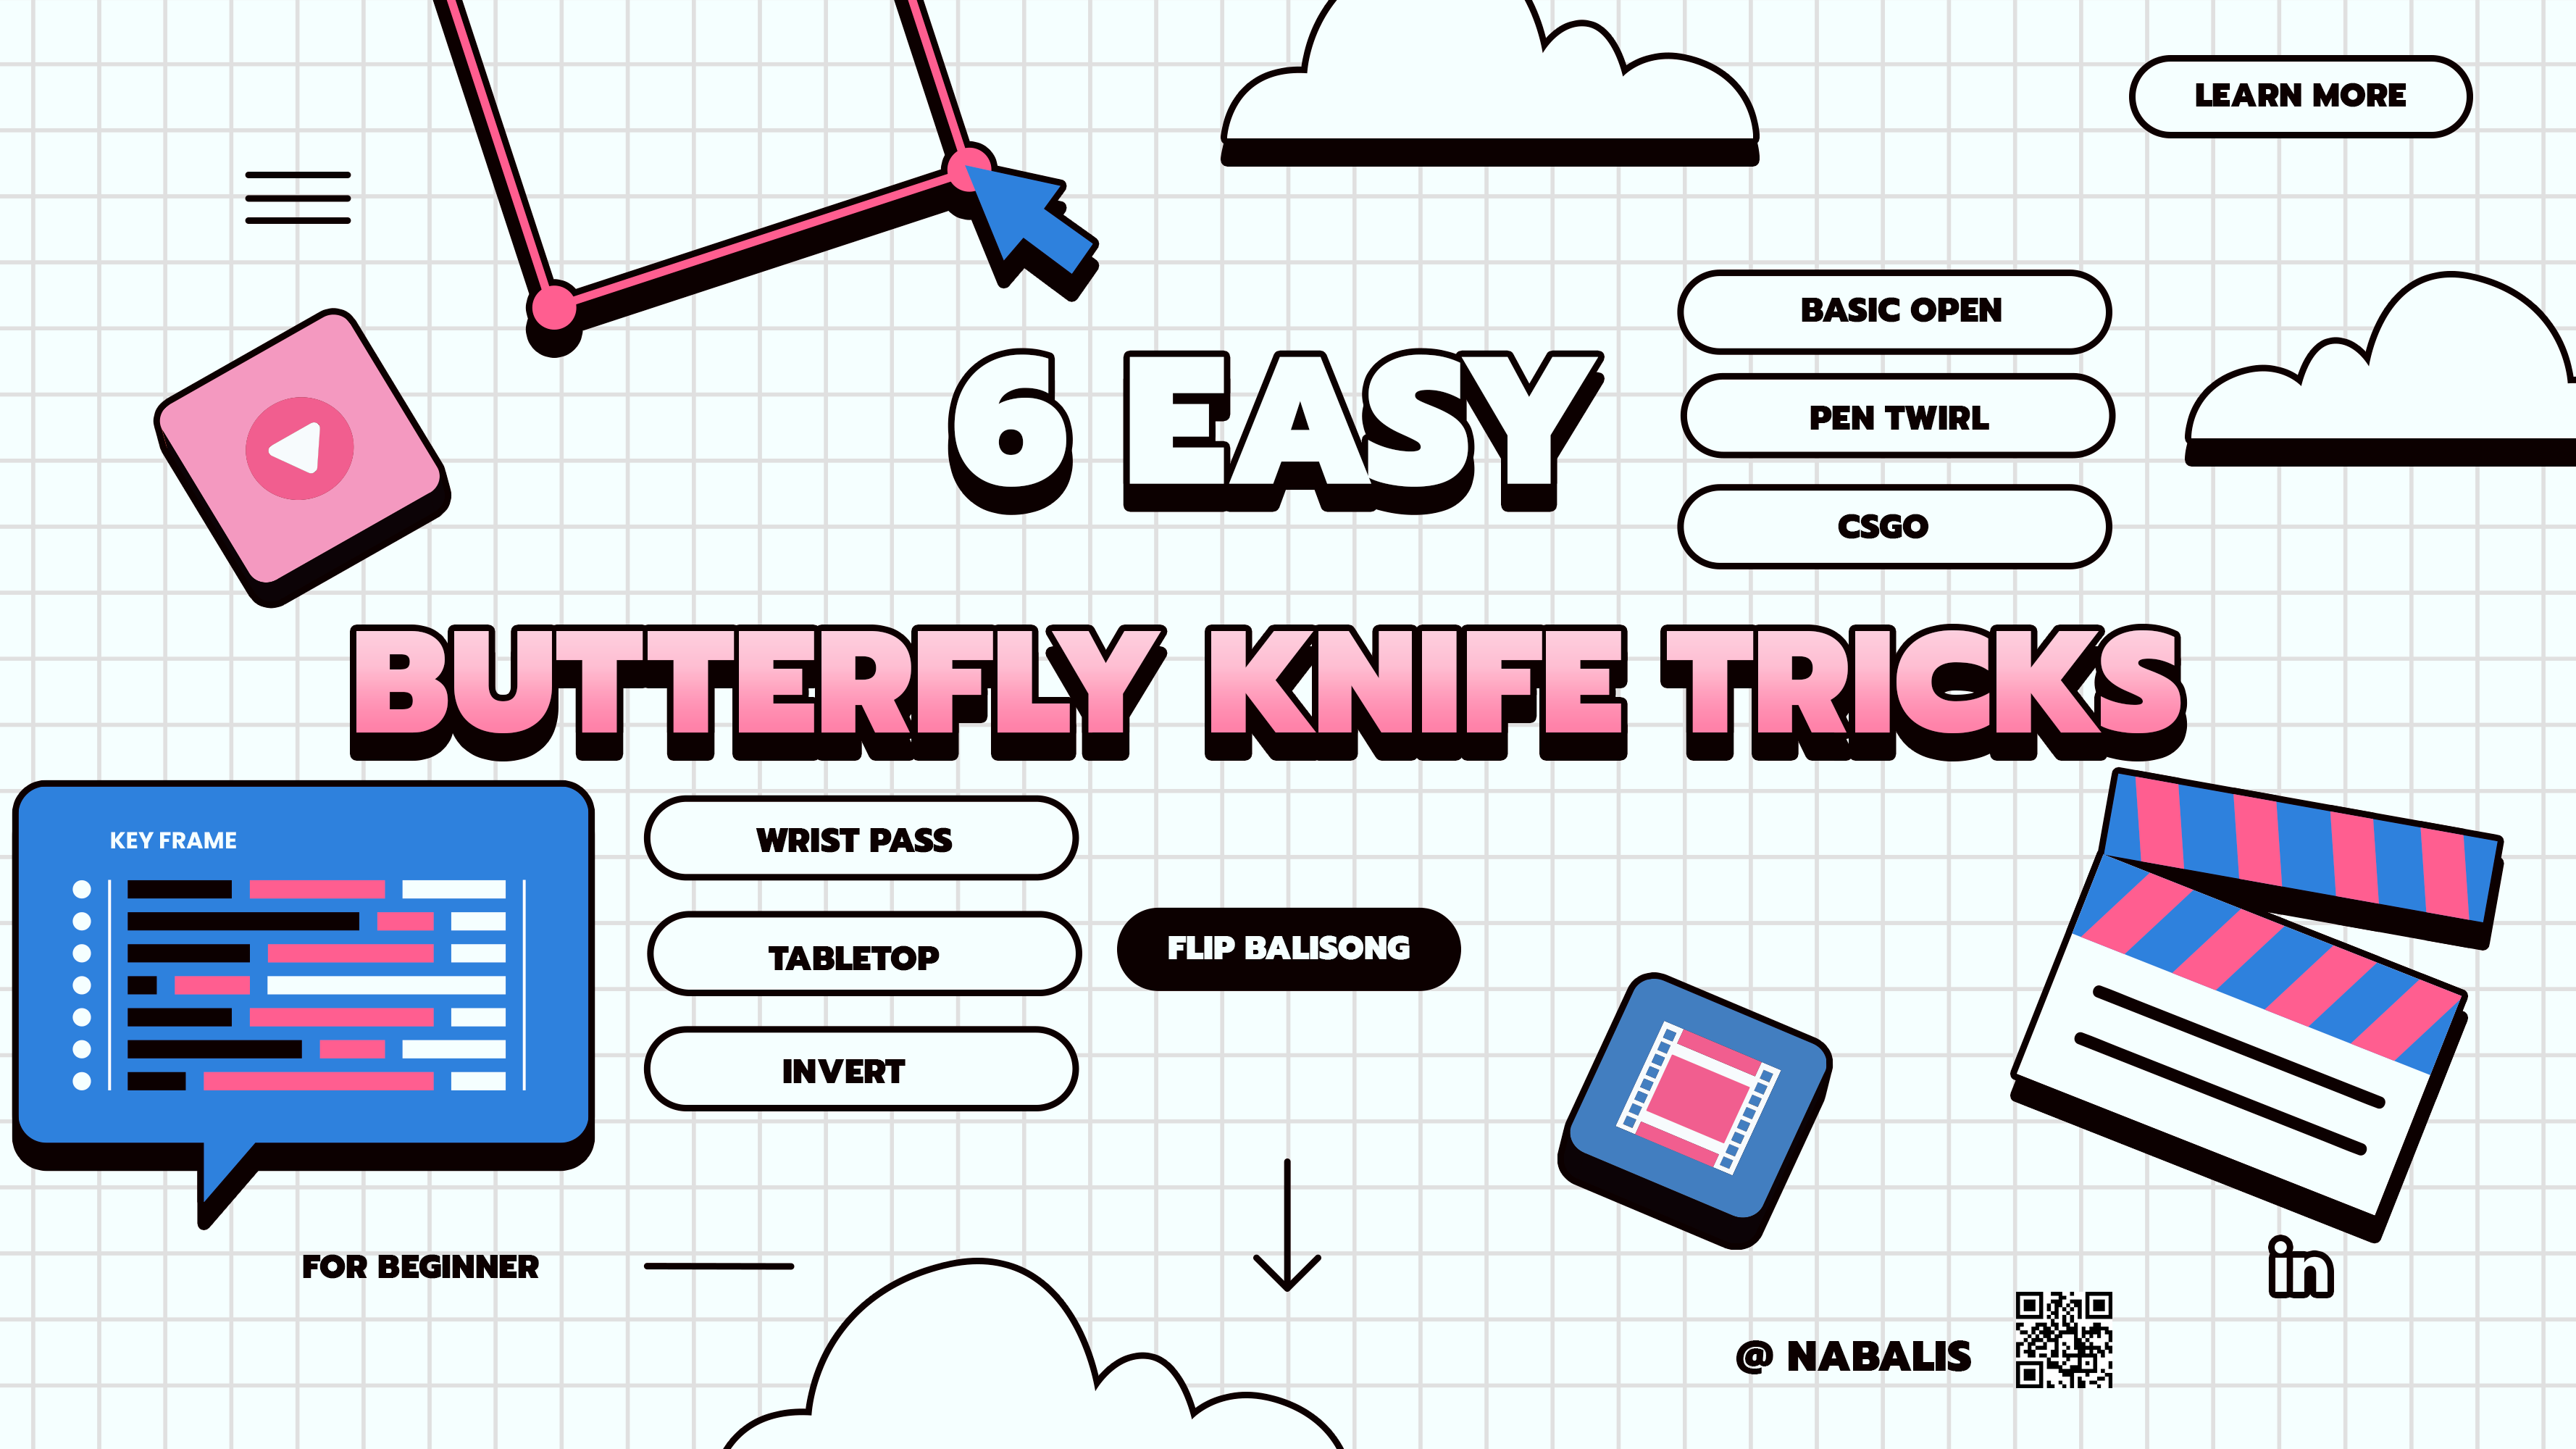 Amusing Tricks to Perform with a Butterfly Knife